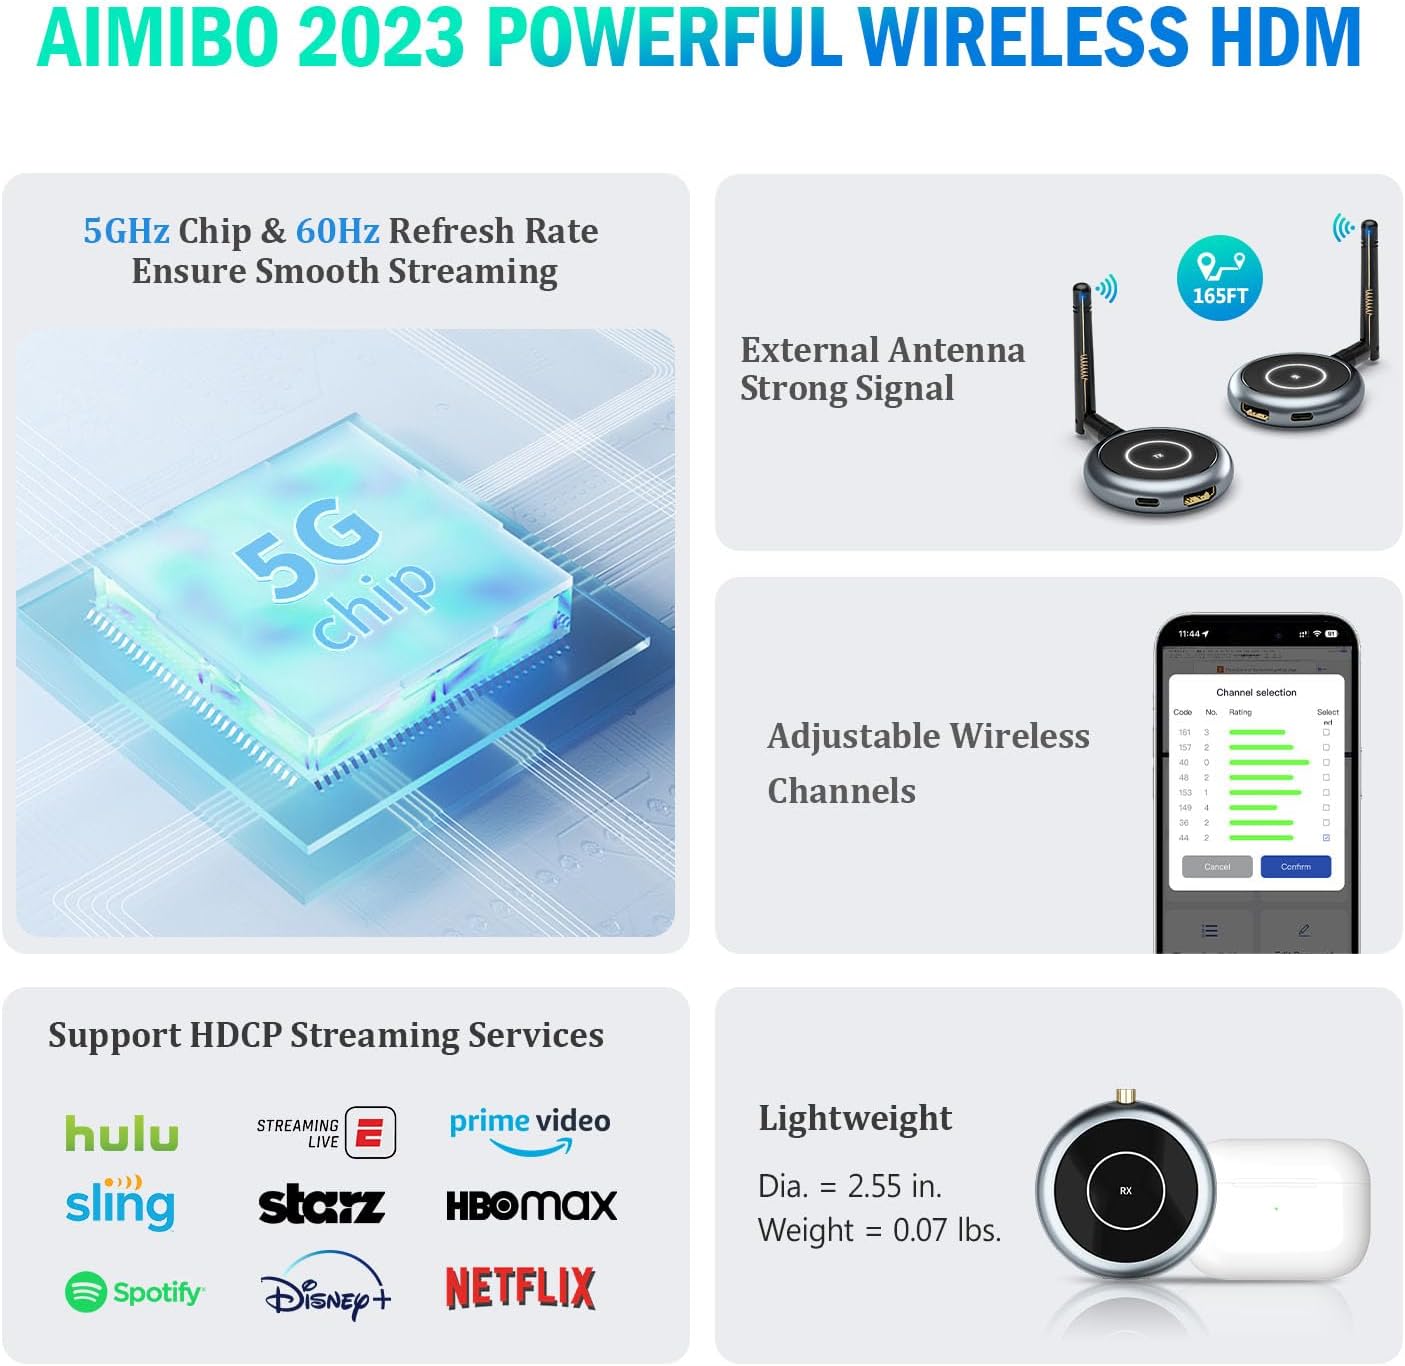 4K Wireless HDMI? A Full Review of AIMIBO's 4K HDMI Wireless Transmitter  and Receiver 